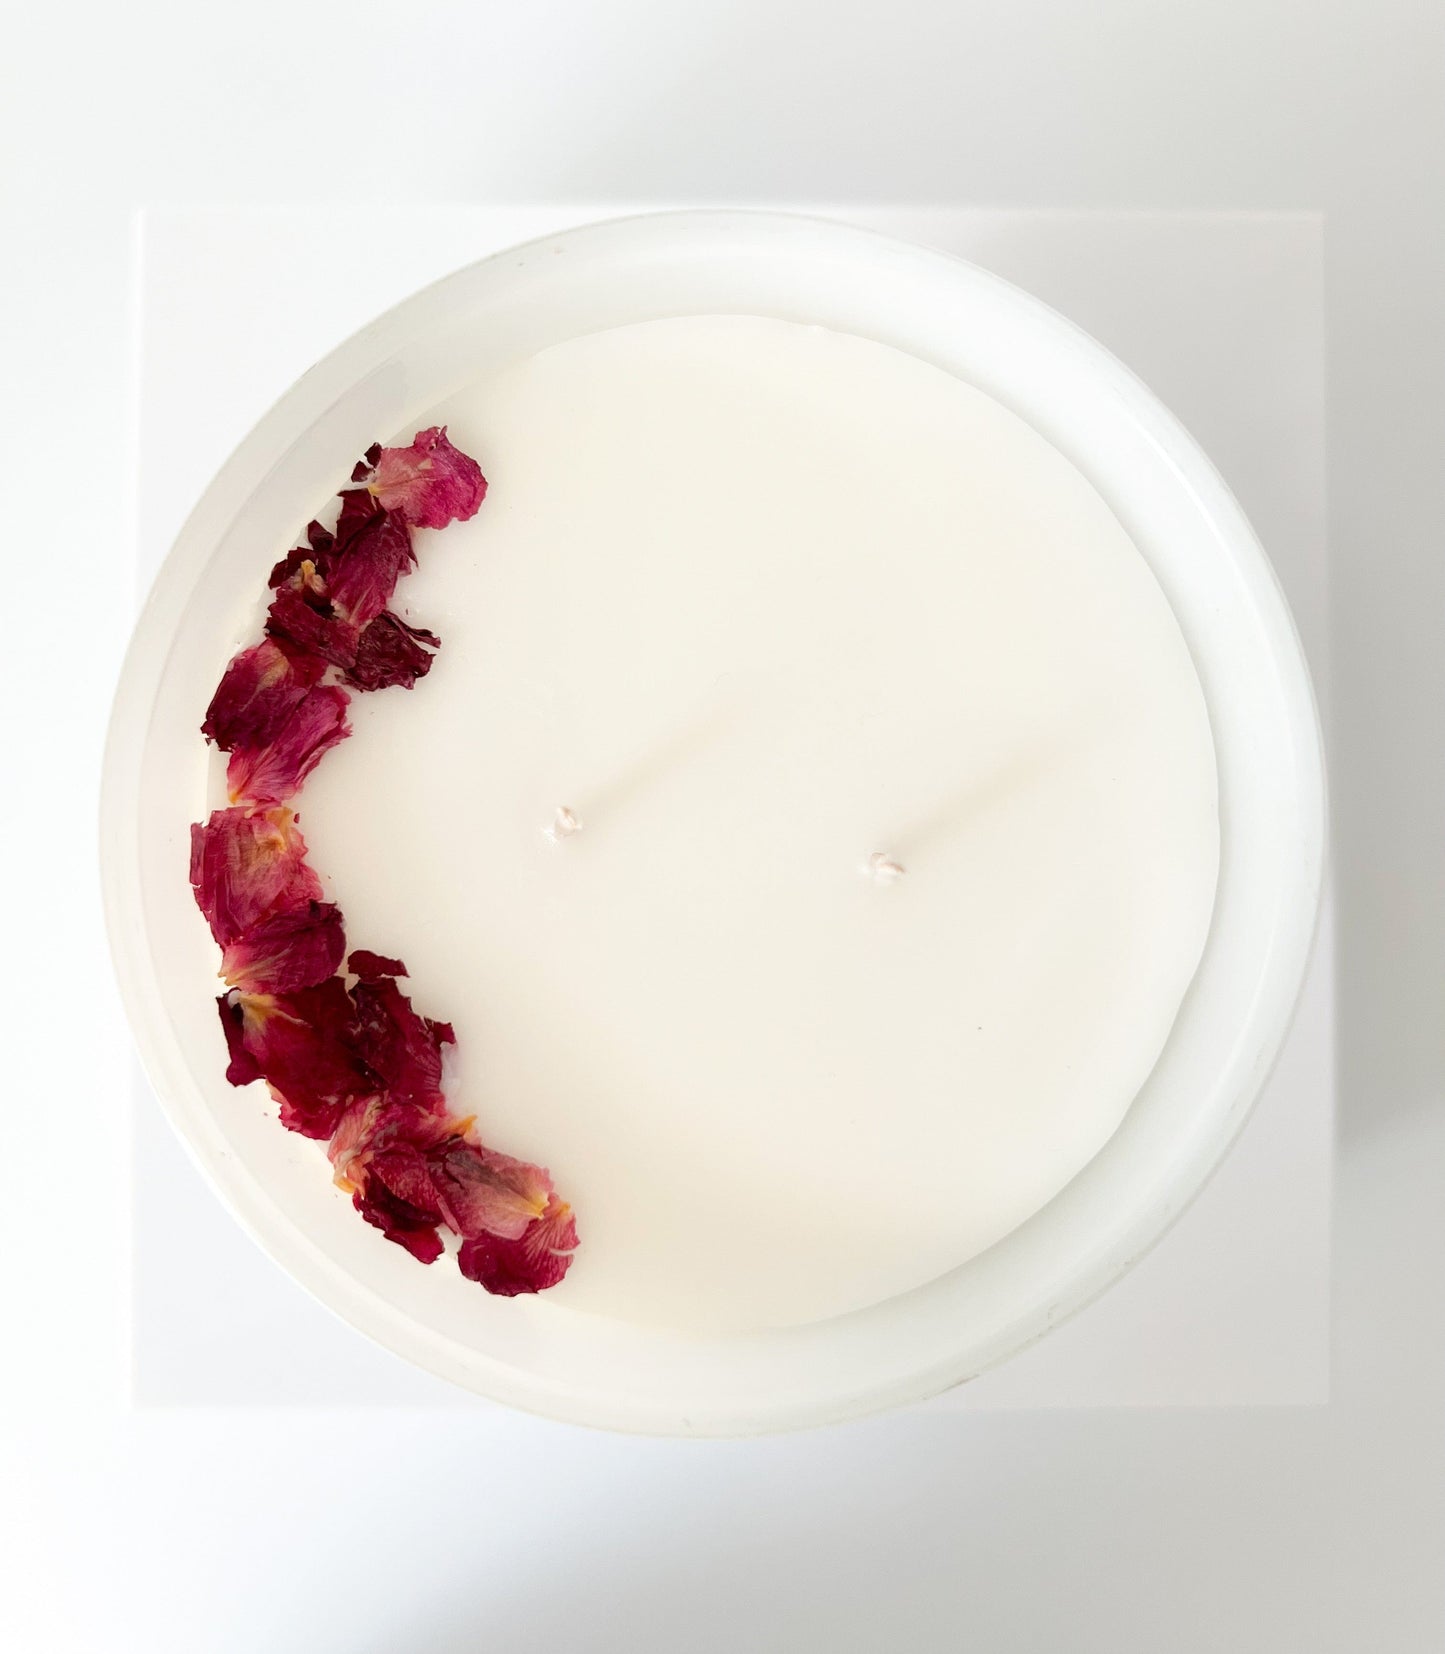 Graceful Glow Candle Co. Candle Sultry Glow